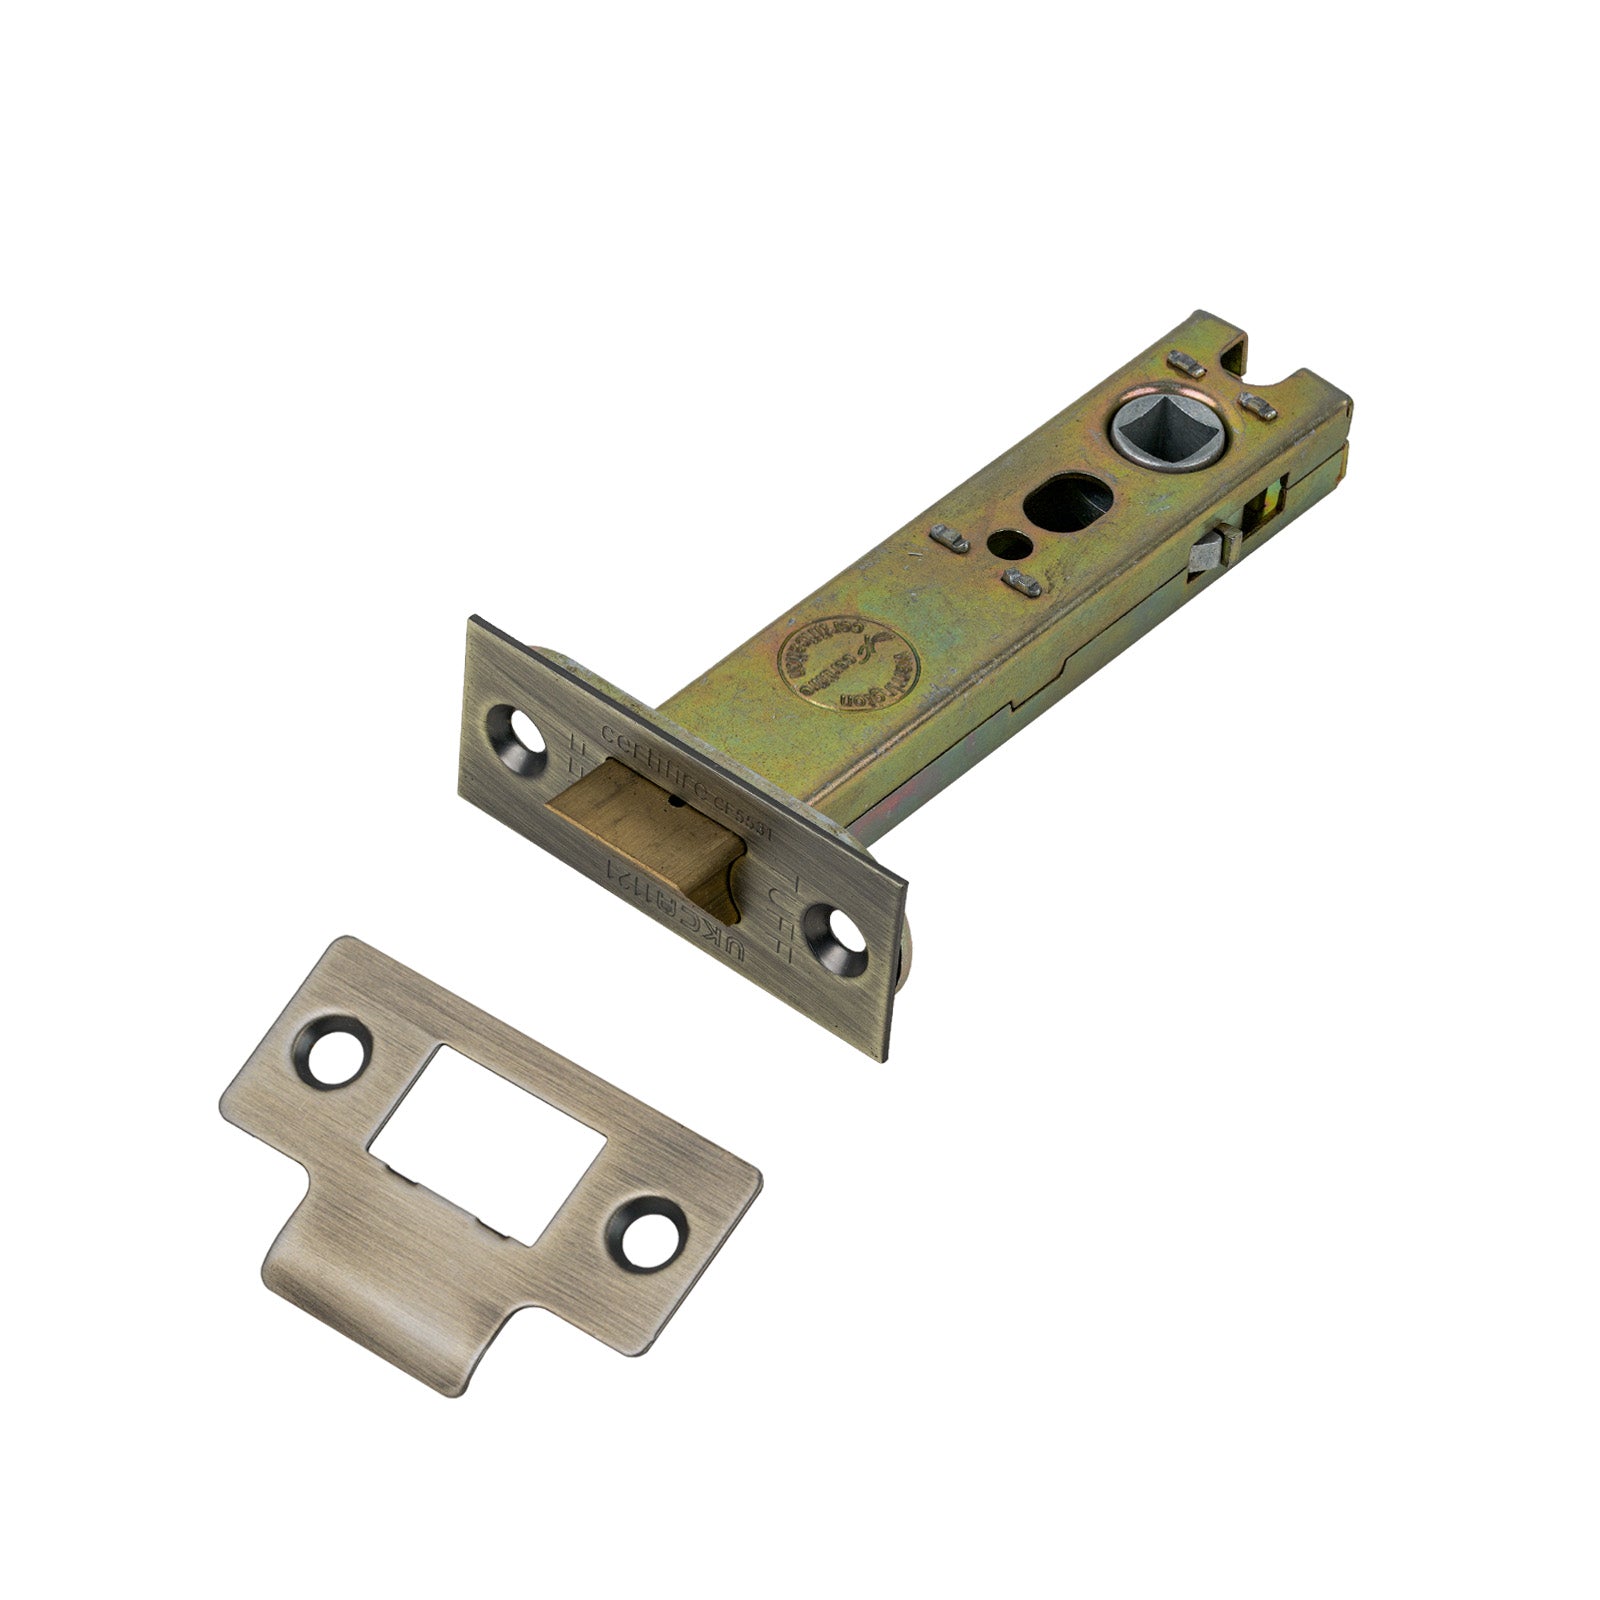 SHOW Heavy Duty Tubular Latch - 4 Inch with Matt Antique Brass finished forend and striker plate